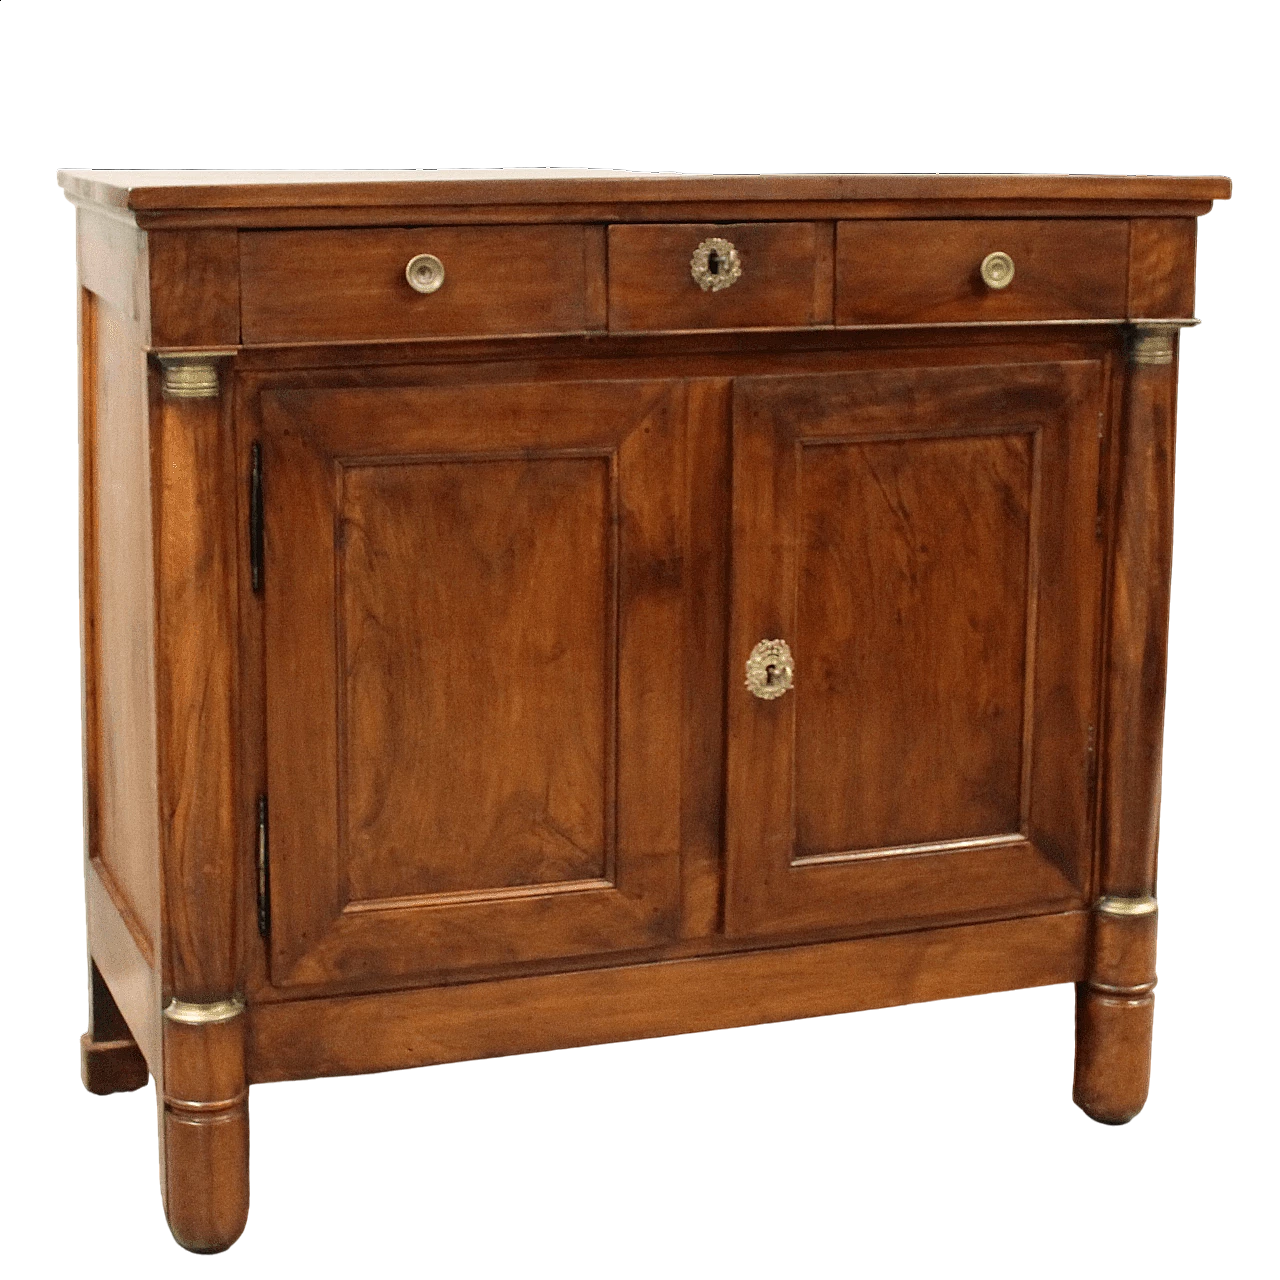 Empire walnut sideboard with doors and drawers, early 19th century 11